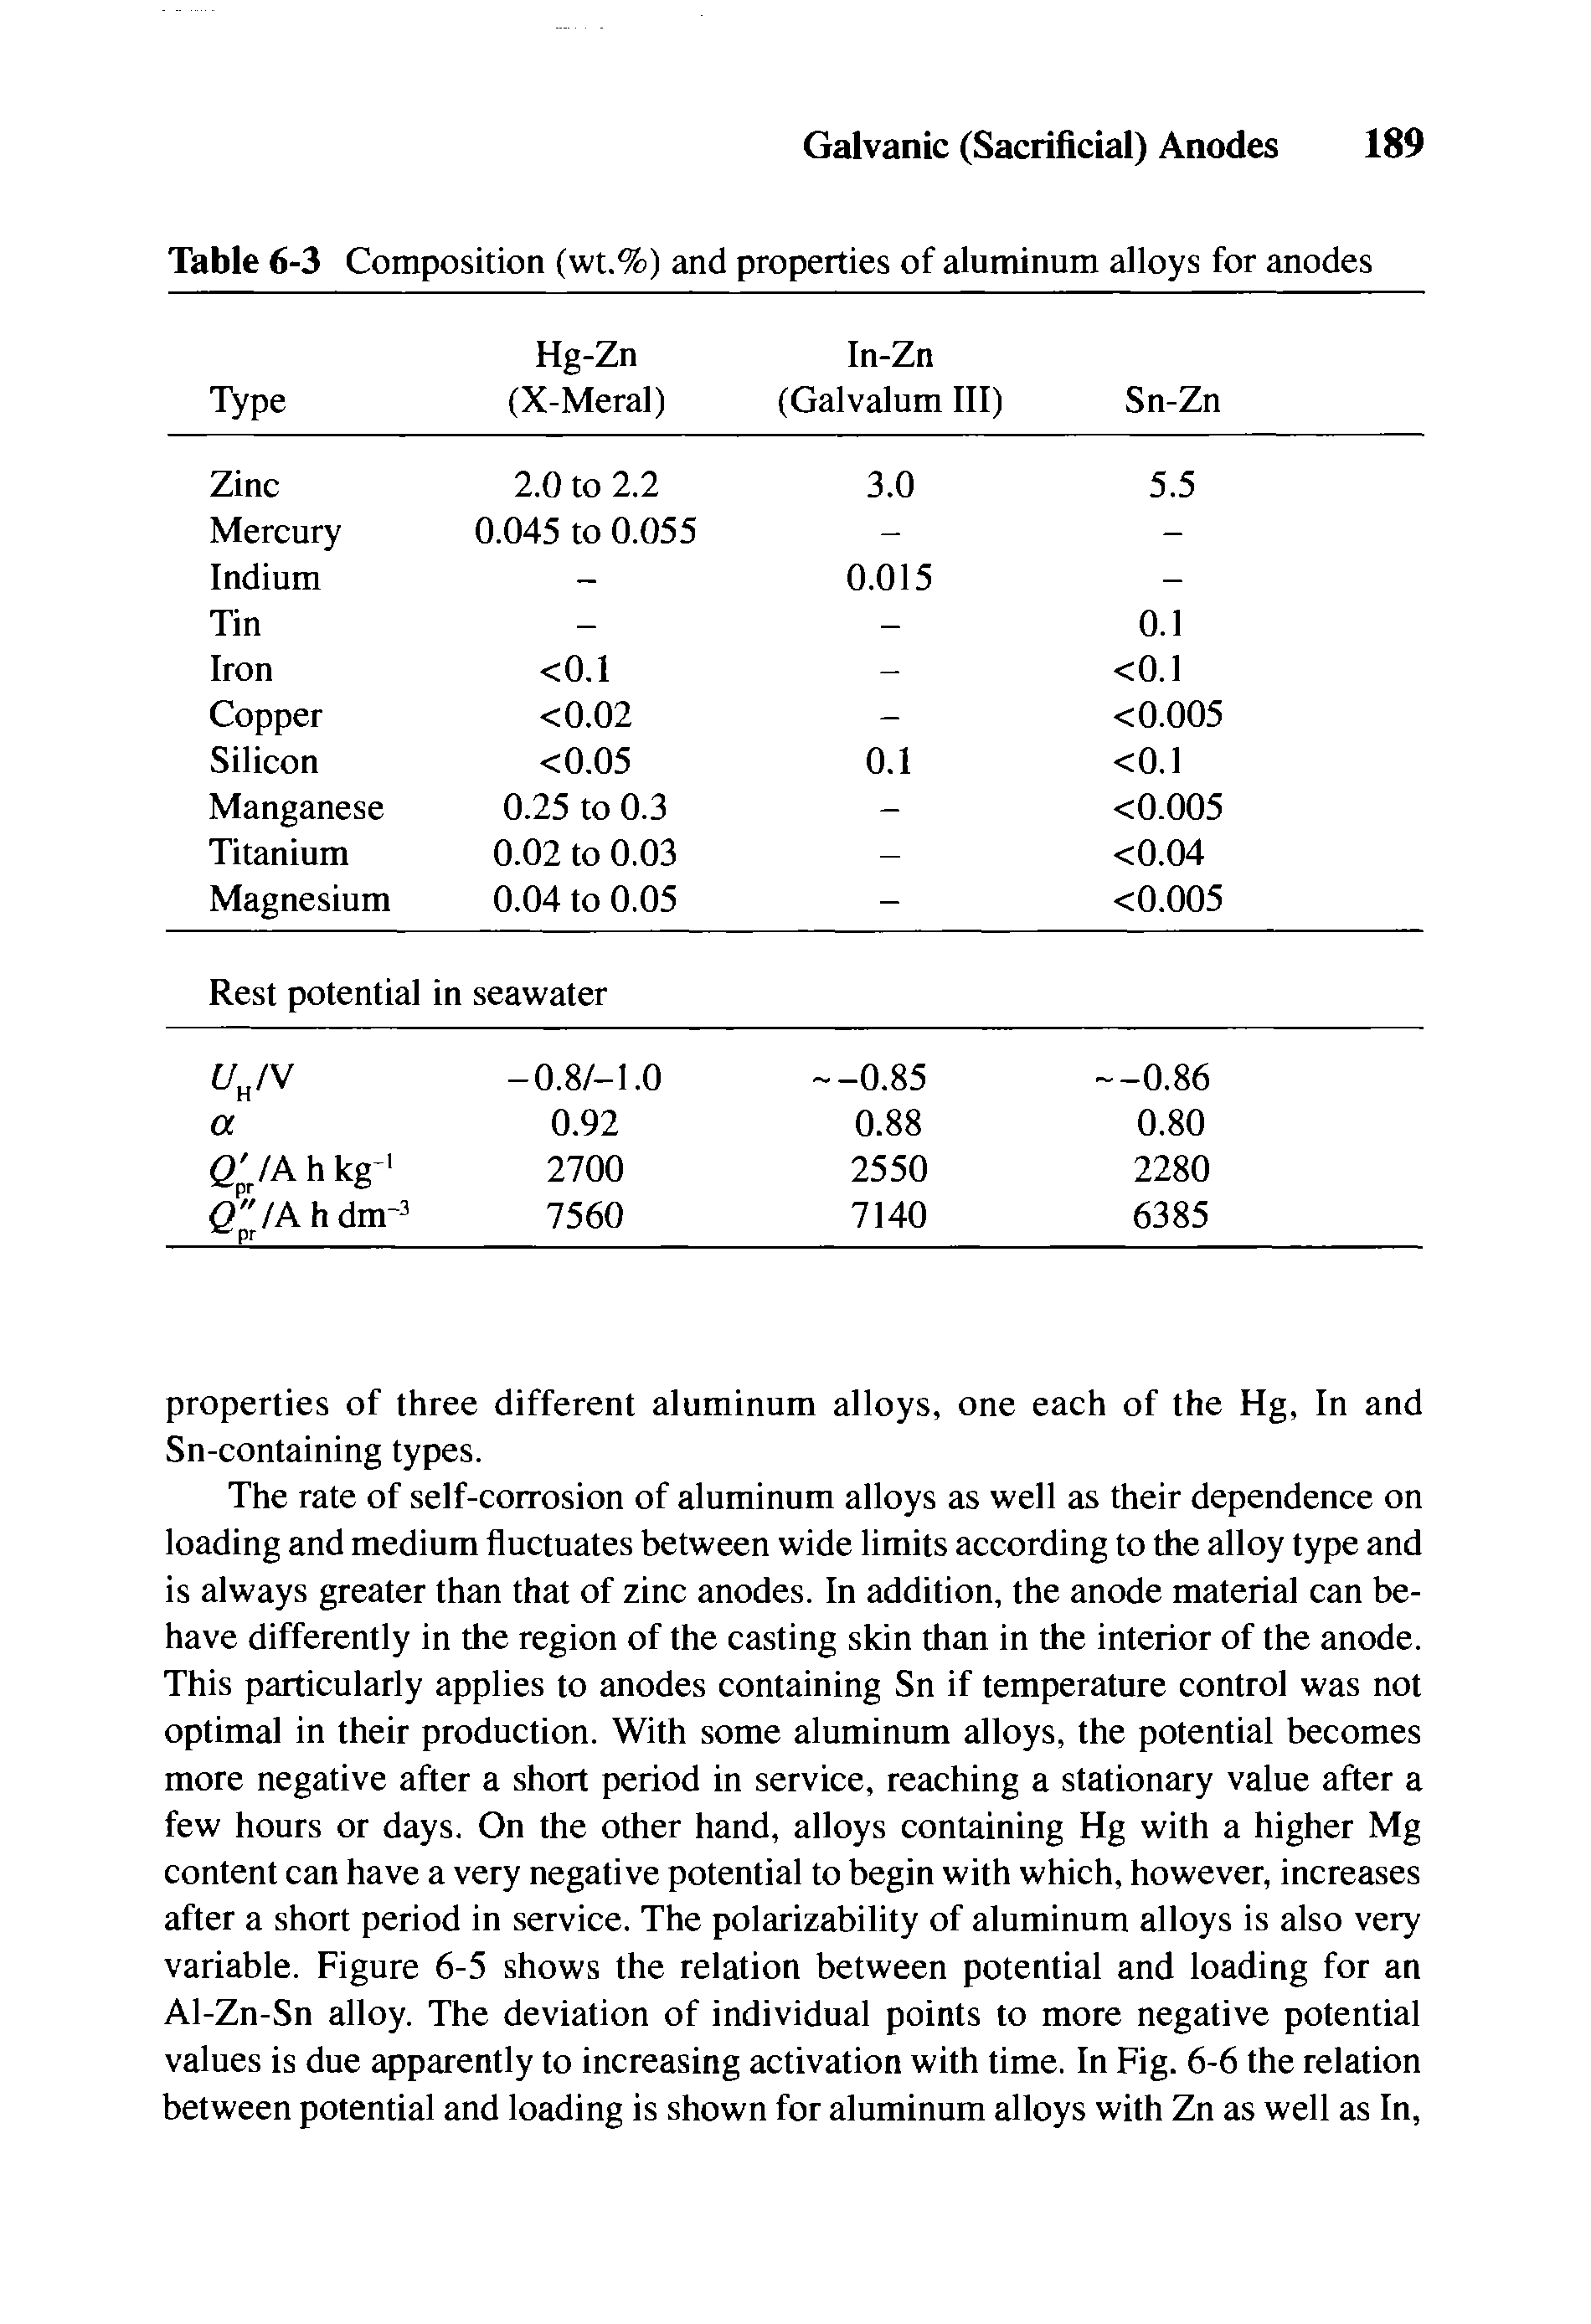 Table 6-3 Composition (wt.%) and properties of aluminum alloys for anodes...